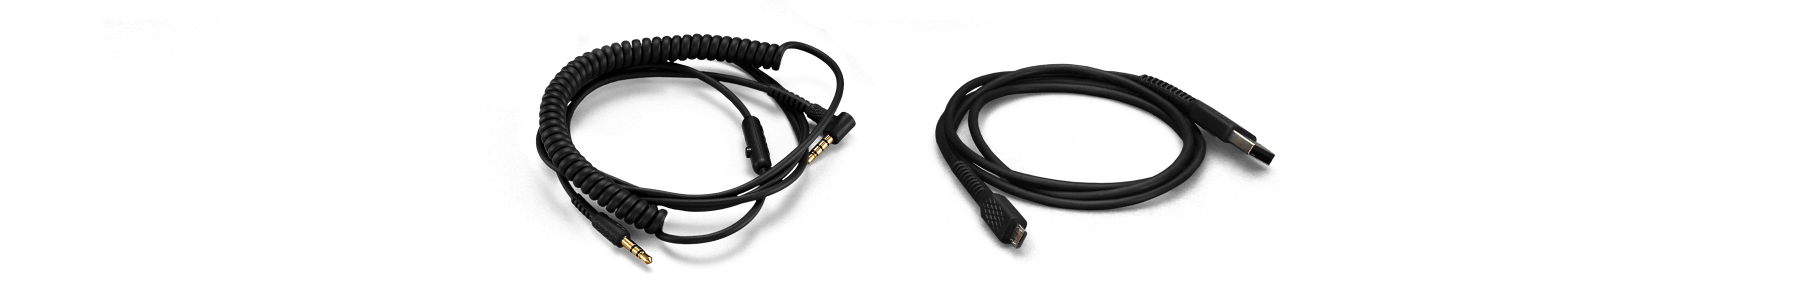 Marshall III audioshop cable usb and cable 3.5